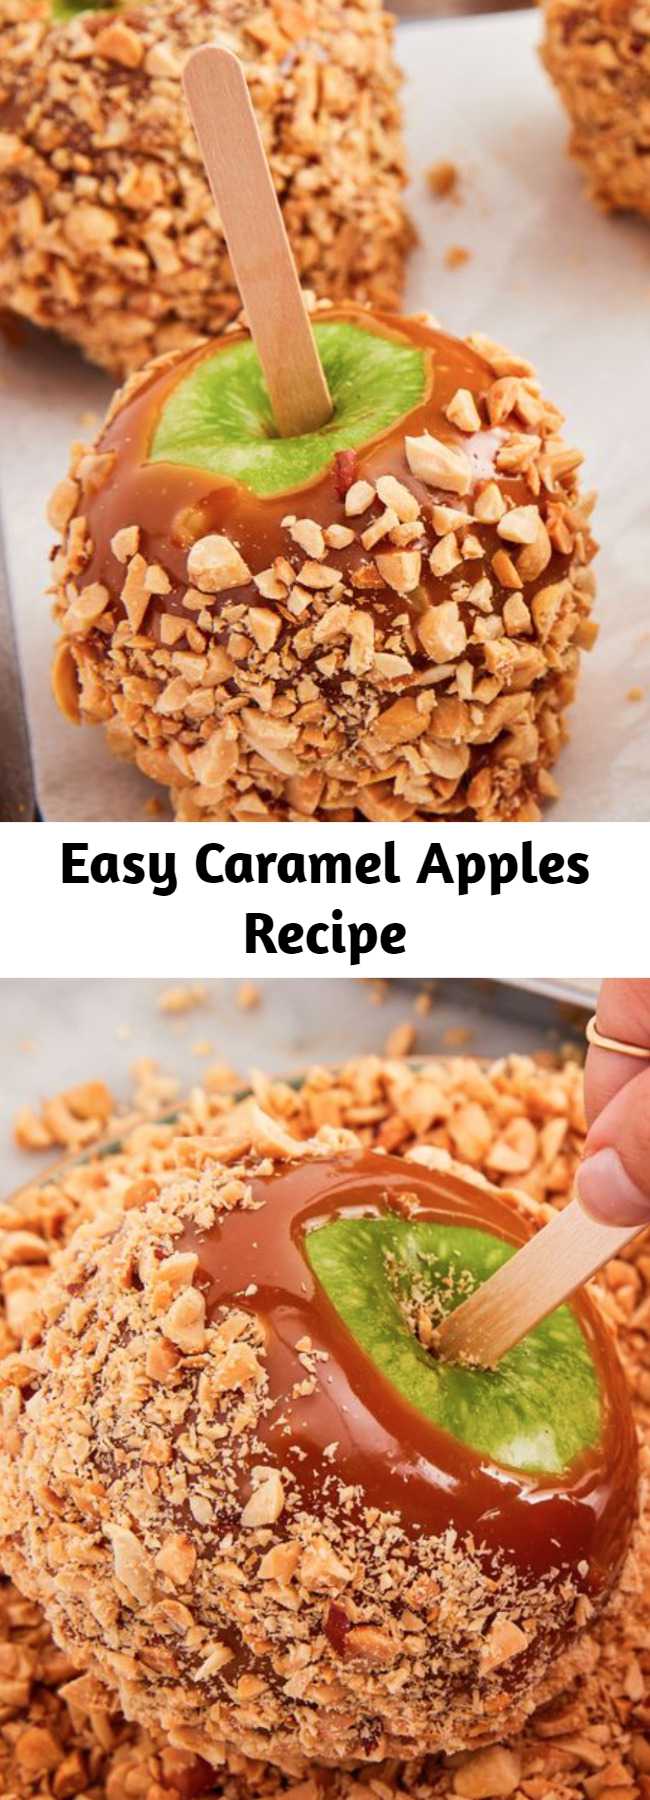 Easy Caramel Apples Recipe - Caramel apples are one of Fall's greatest pleasures. Not only are they easy to make, they're also super fun to personalize. Follow these easy step-by-step instructions and have an autumnal treat in no time.